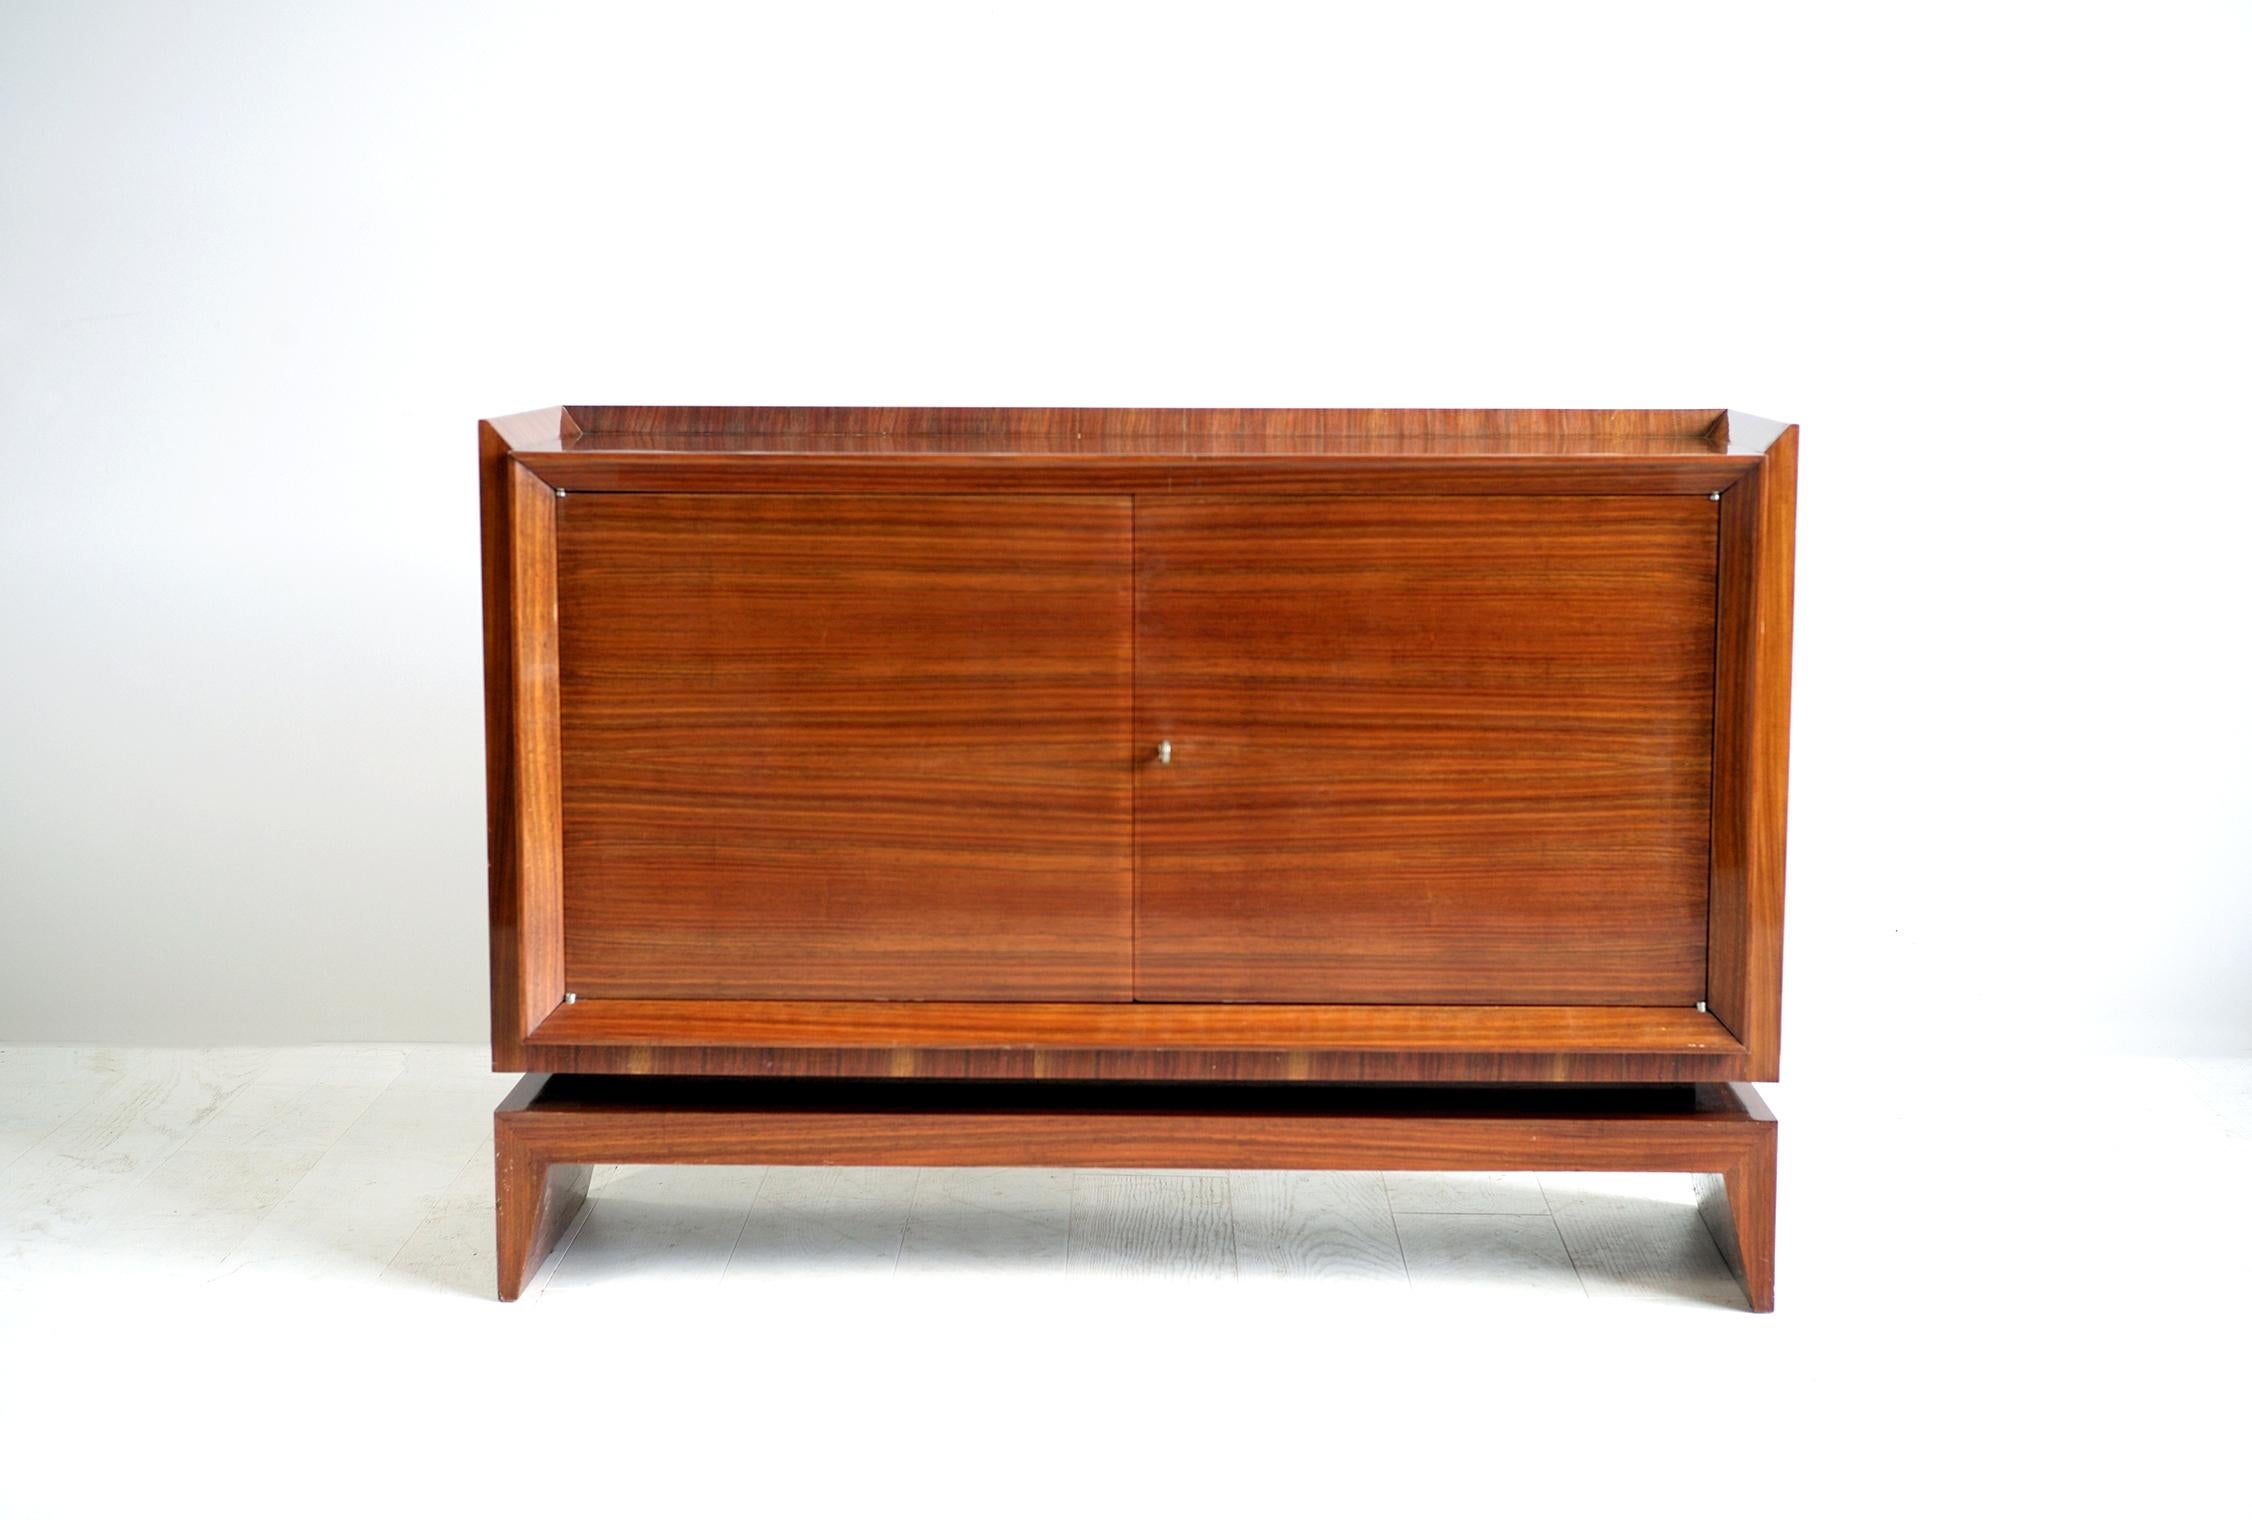 Studio Athelia, Modernist Sideboard in Walnut, France, 1935 In Good Condition For Sale In Catonvielle, FR